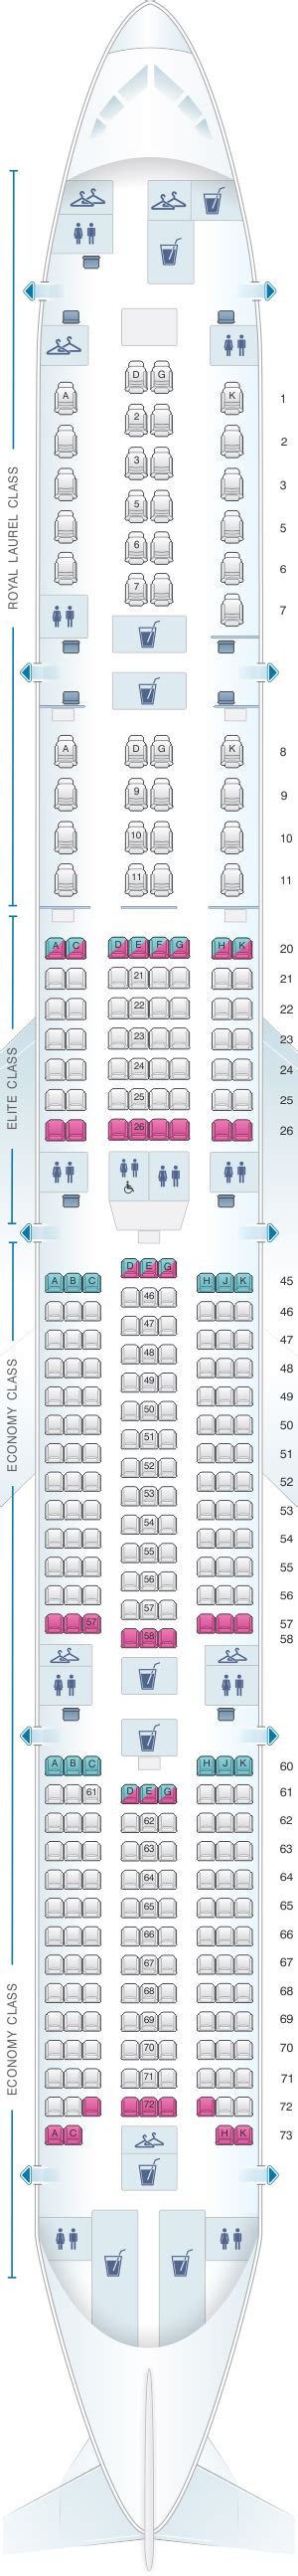 Eva air seating chart. Seats 26. Pitch 76". Width 20". Recline 180°. EVA Air's business class on the Boeing 787-9 offers a harmonious blend of comfort and efficiency. With 26 seats, passengers can relax and enjoy their short-haul journey. The seating is designed for comfort, and the crew ensures every need is met with precision and warmth. 